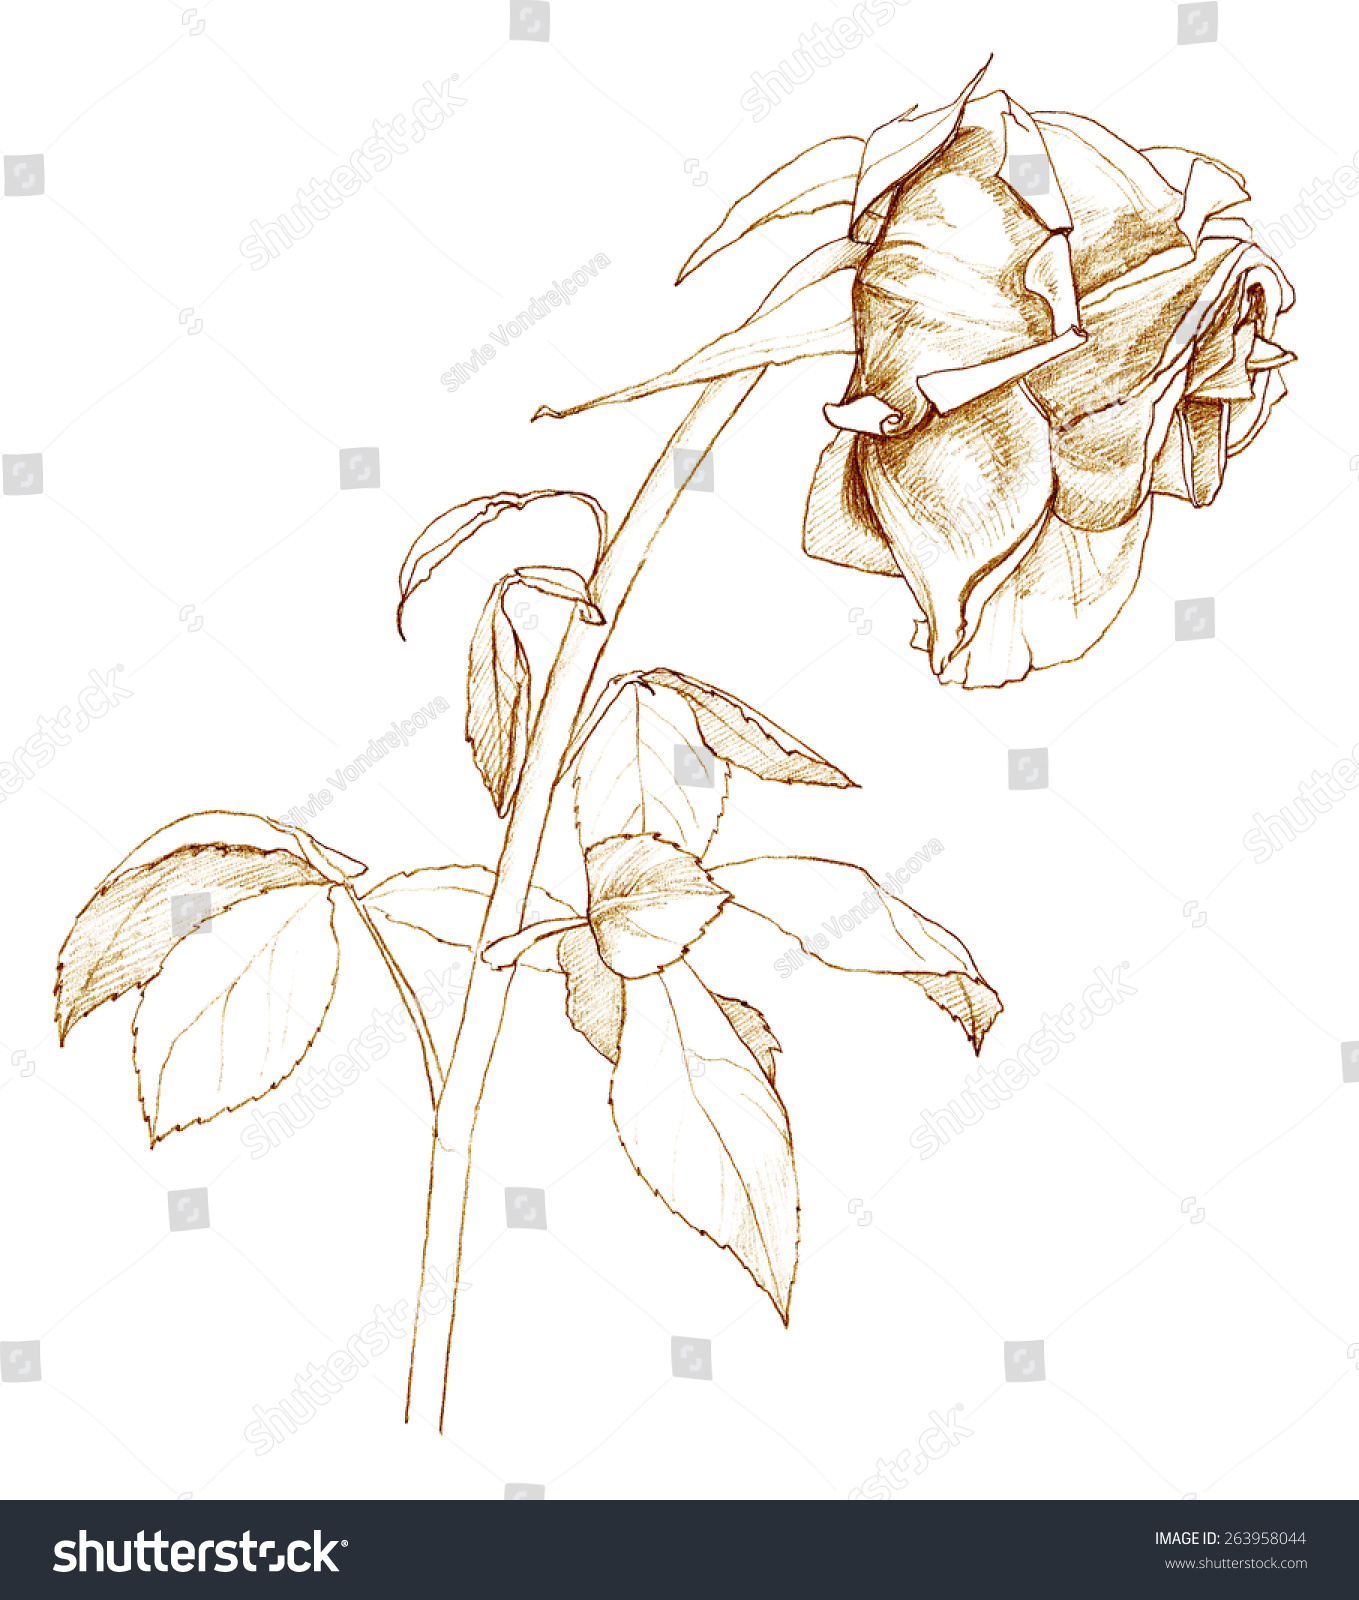 Withered Rose Pencil Drawing Stock Illustration 263958044 Shutterstock